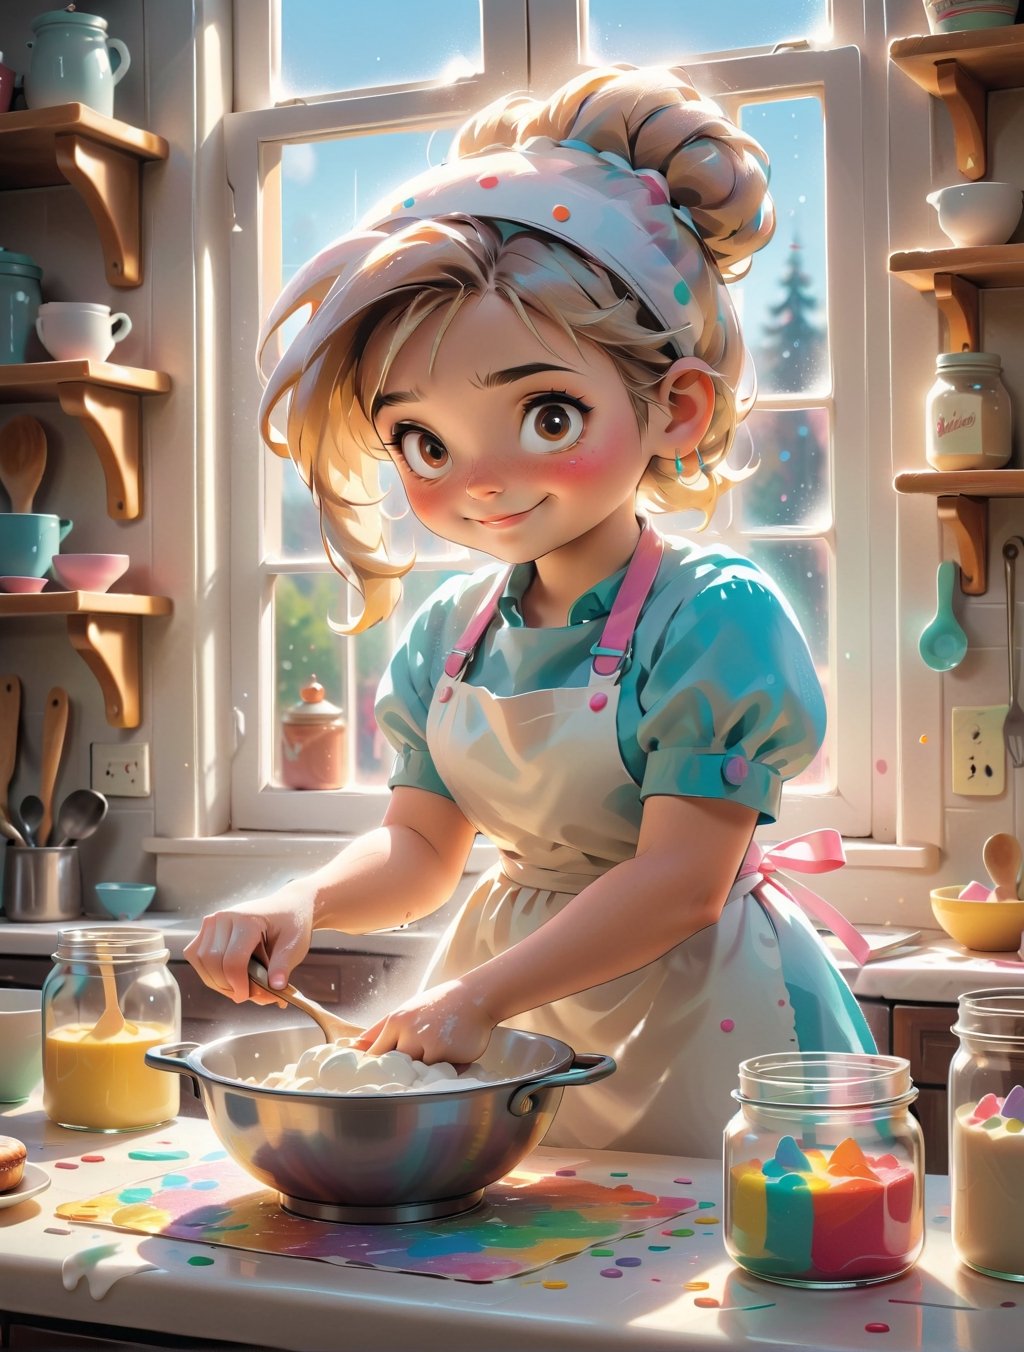 a young girl baking a cake, covered in flour, with a messy bun, flour handprints on her cheeks, focused on carefully whisking the batter, in a cozy kitchen filled with vintage baking tools, jars of colorful sprinkles, a recipe book open on the counter, sunlight streaming through a window, capturing the warmth and joy of baking, in a whimsical and artistic illustration style. 